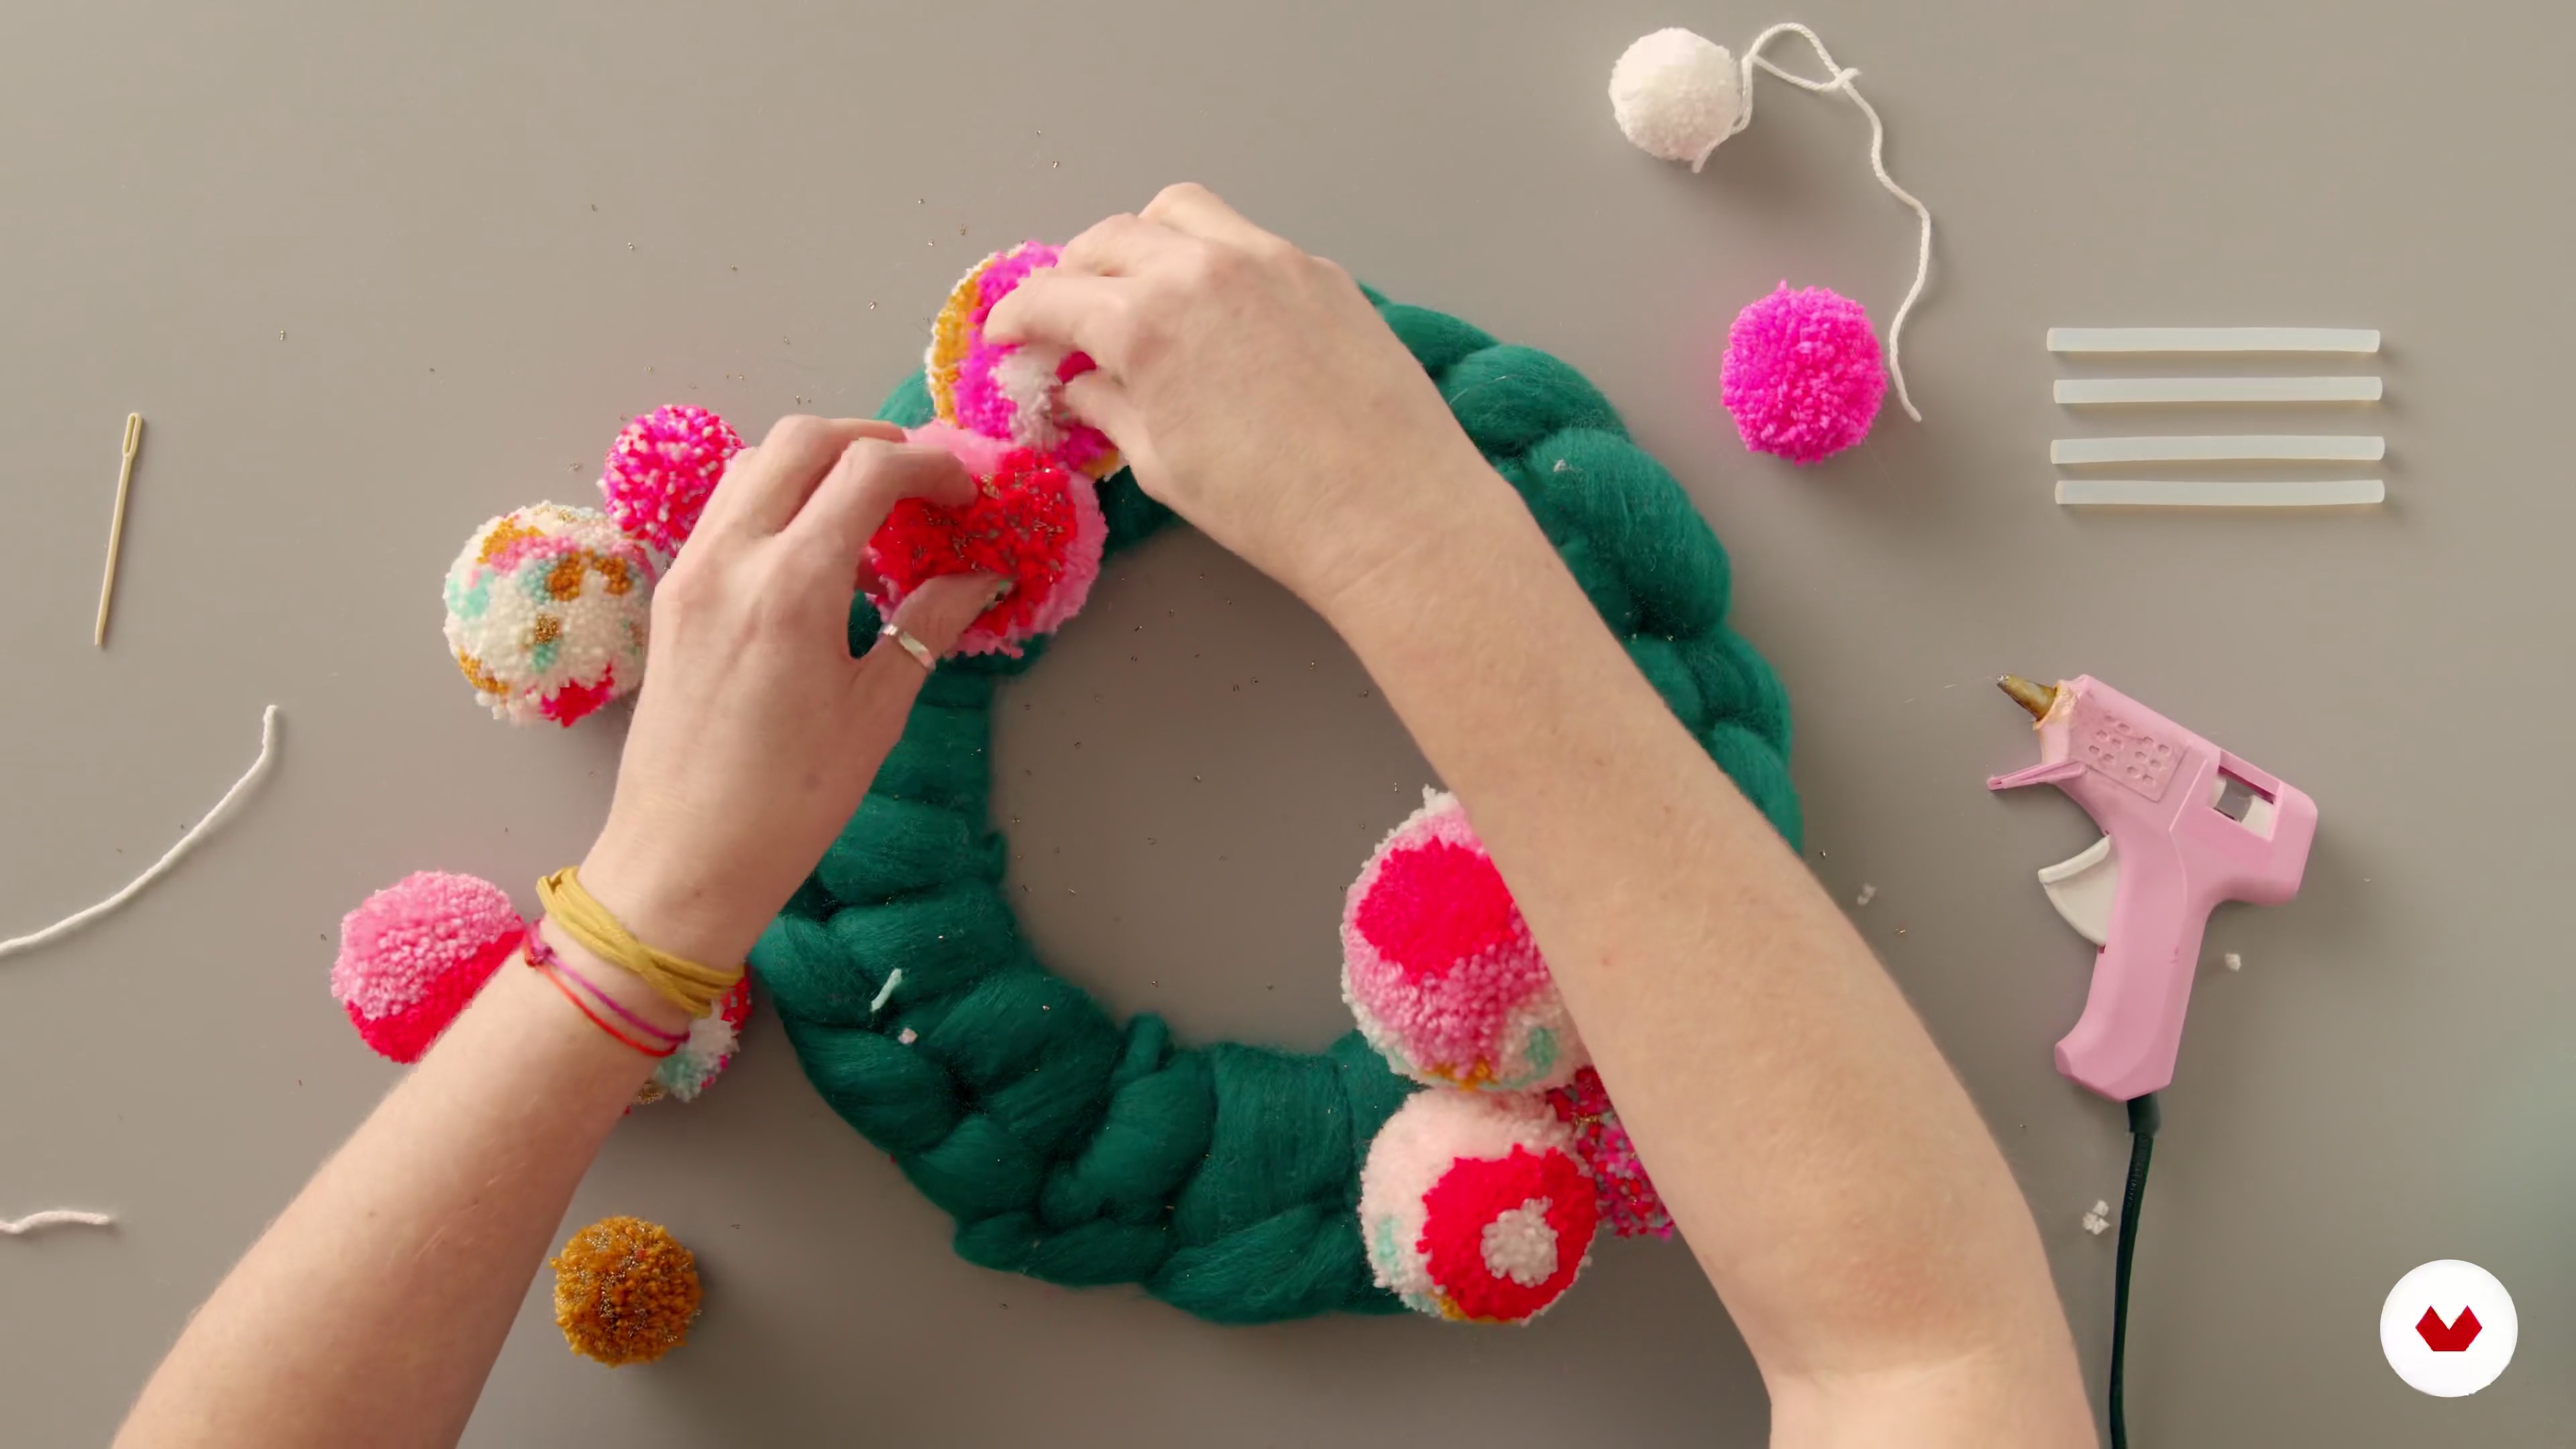 Building the Wreath | "Pom-Pom Design and Creation" (sewyeah) |